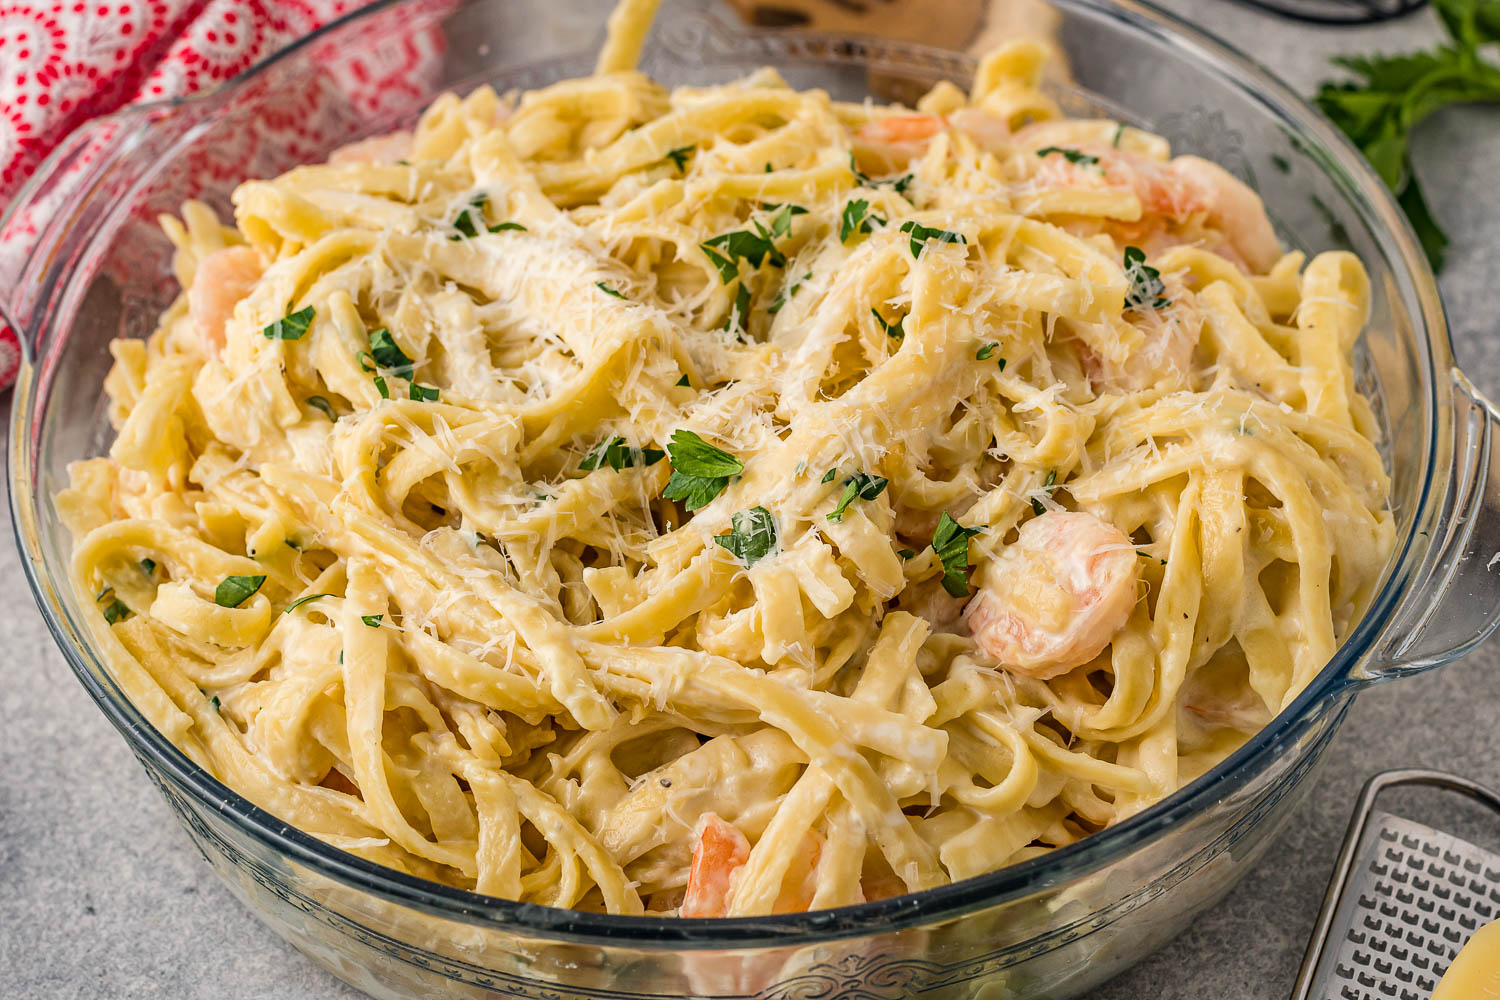 Shrimp and fettuccine pasta in a large glass bowl.